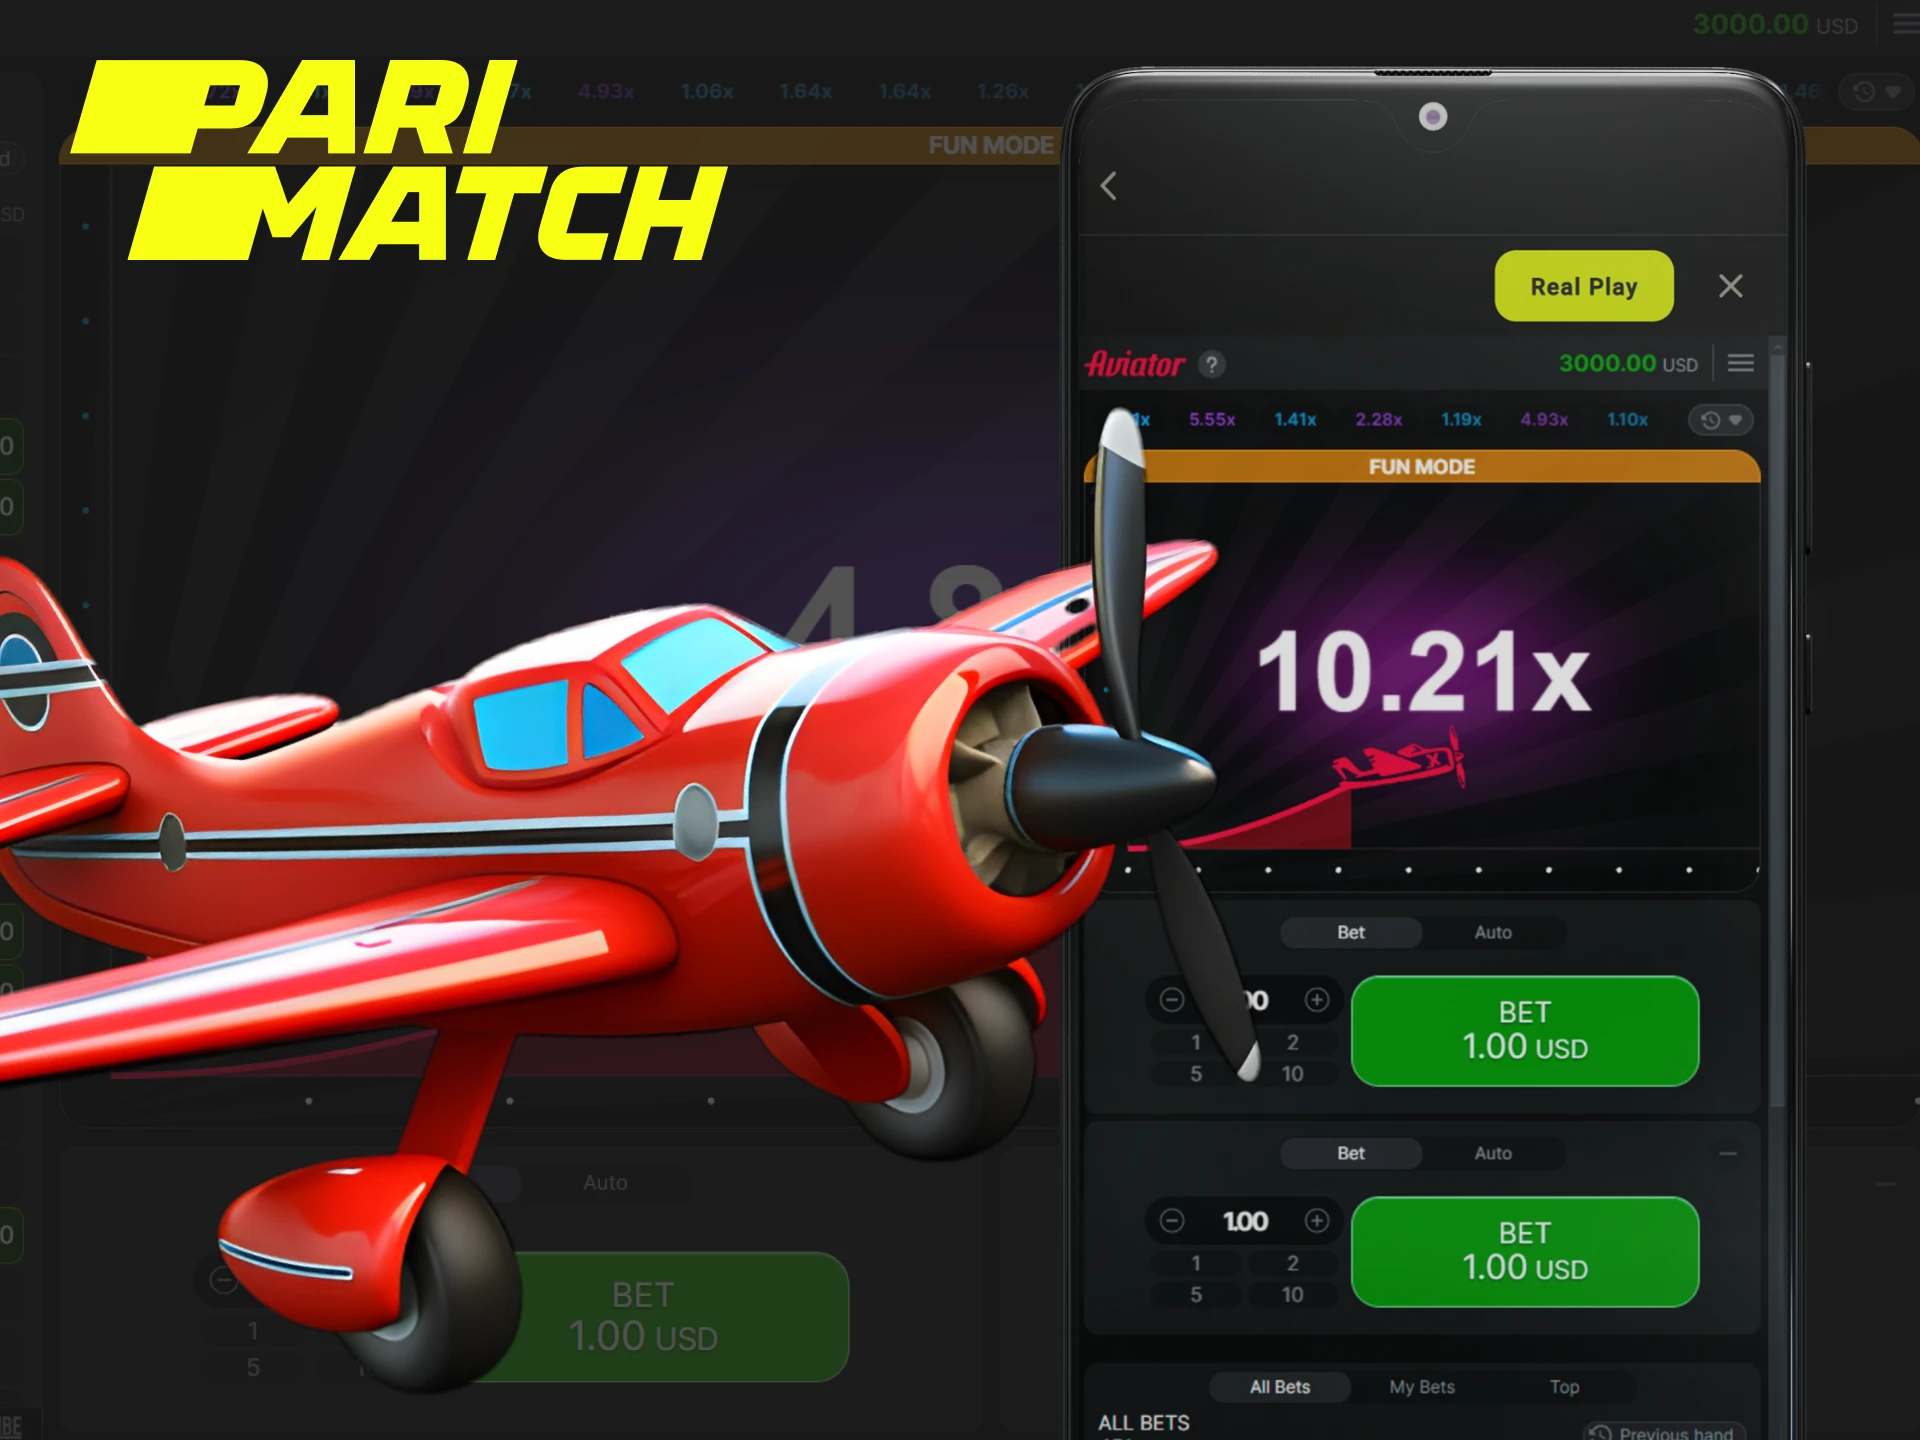 Aviator is one of the popular crash games that you can play on the Parimatch app.